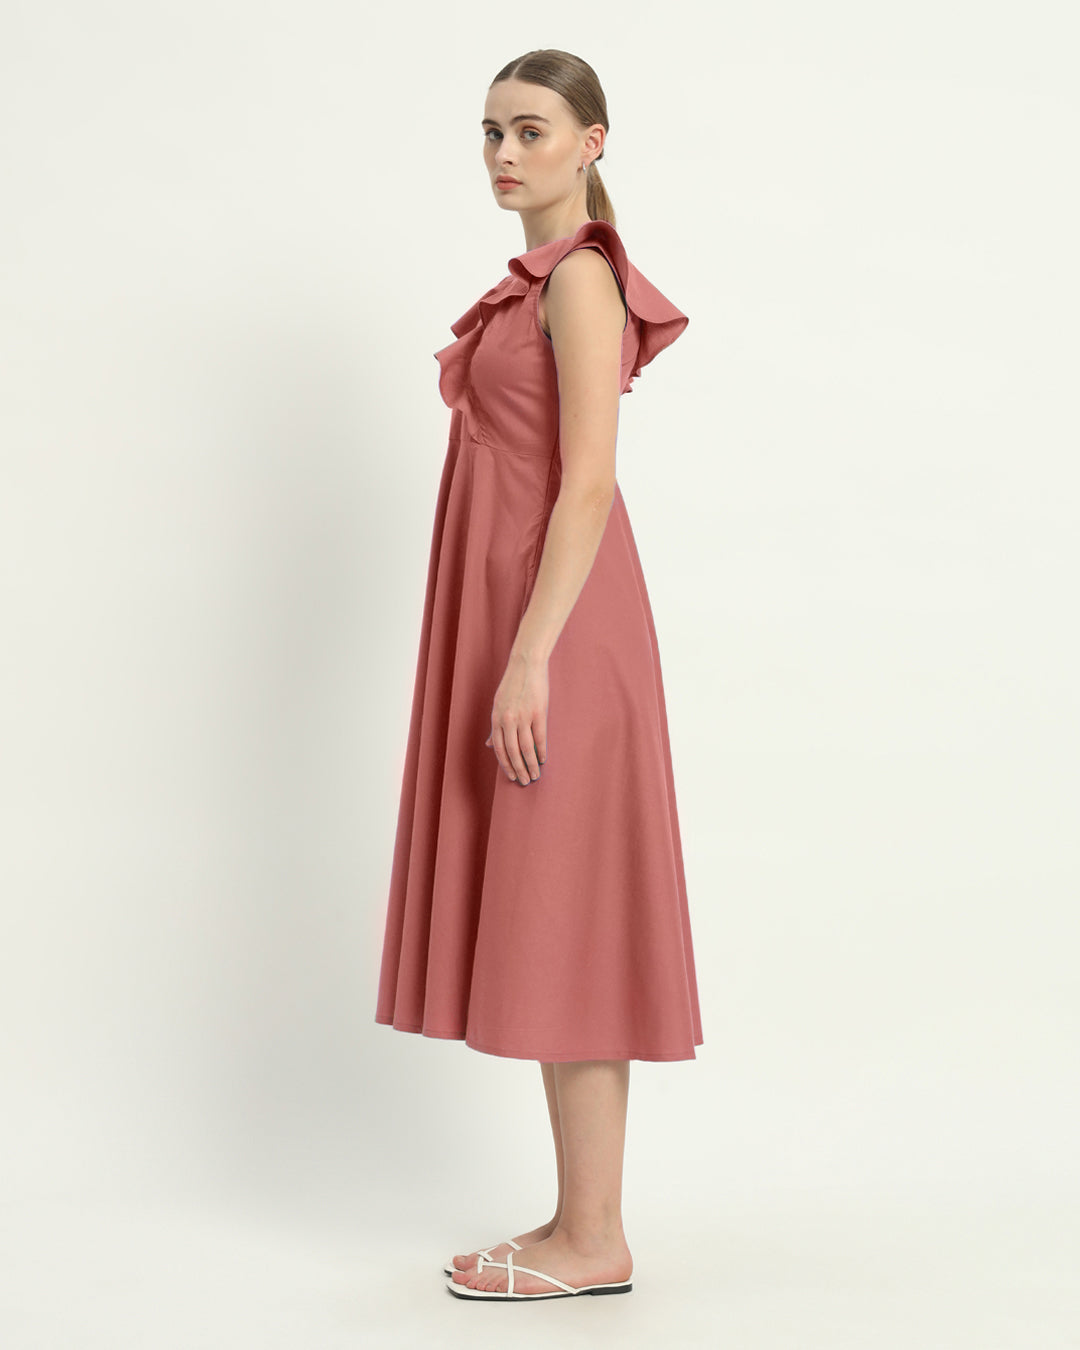 The Ivory Pink Albany Cotton Dress